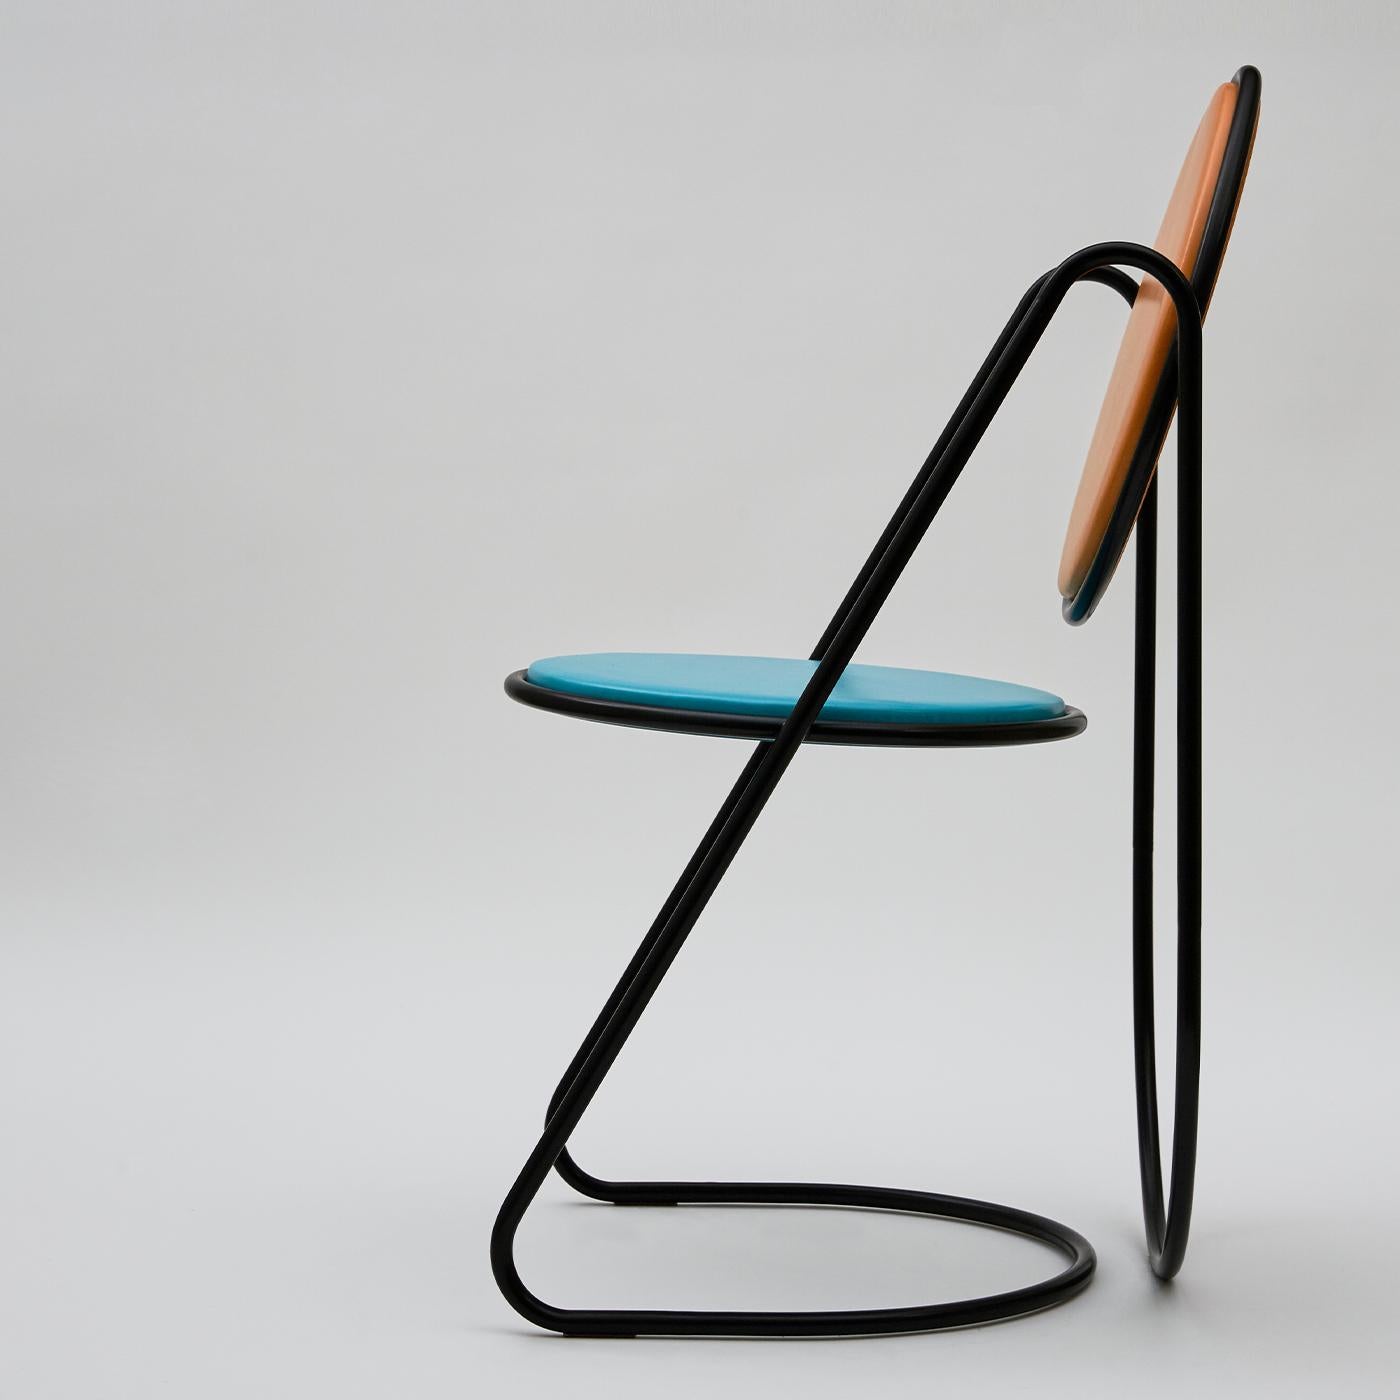 Dramatic and sculptural, this chair from the U-Disk Collection is sure to capture attention wherever it is placed. A natural addition to a retro-inspired decor, it consists of a continuous, cleverly bent tubular structure in black-lacquered steel